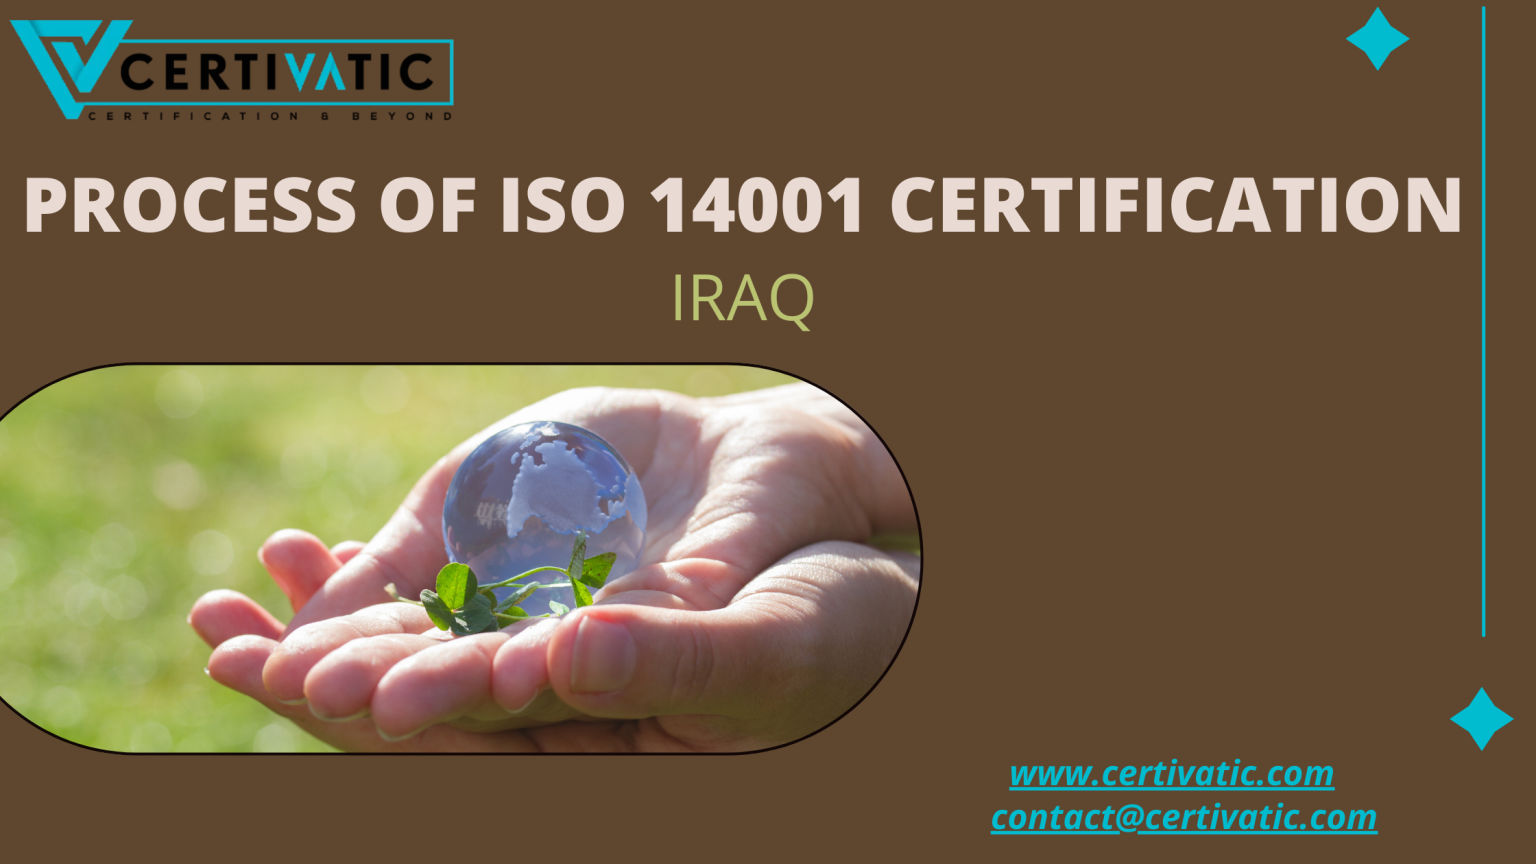 What is the process of ISO 14001 Certification in Iraq?